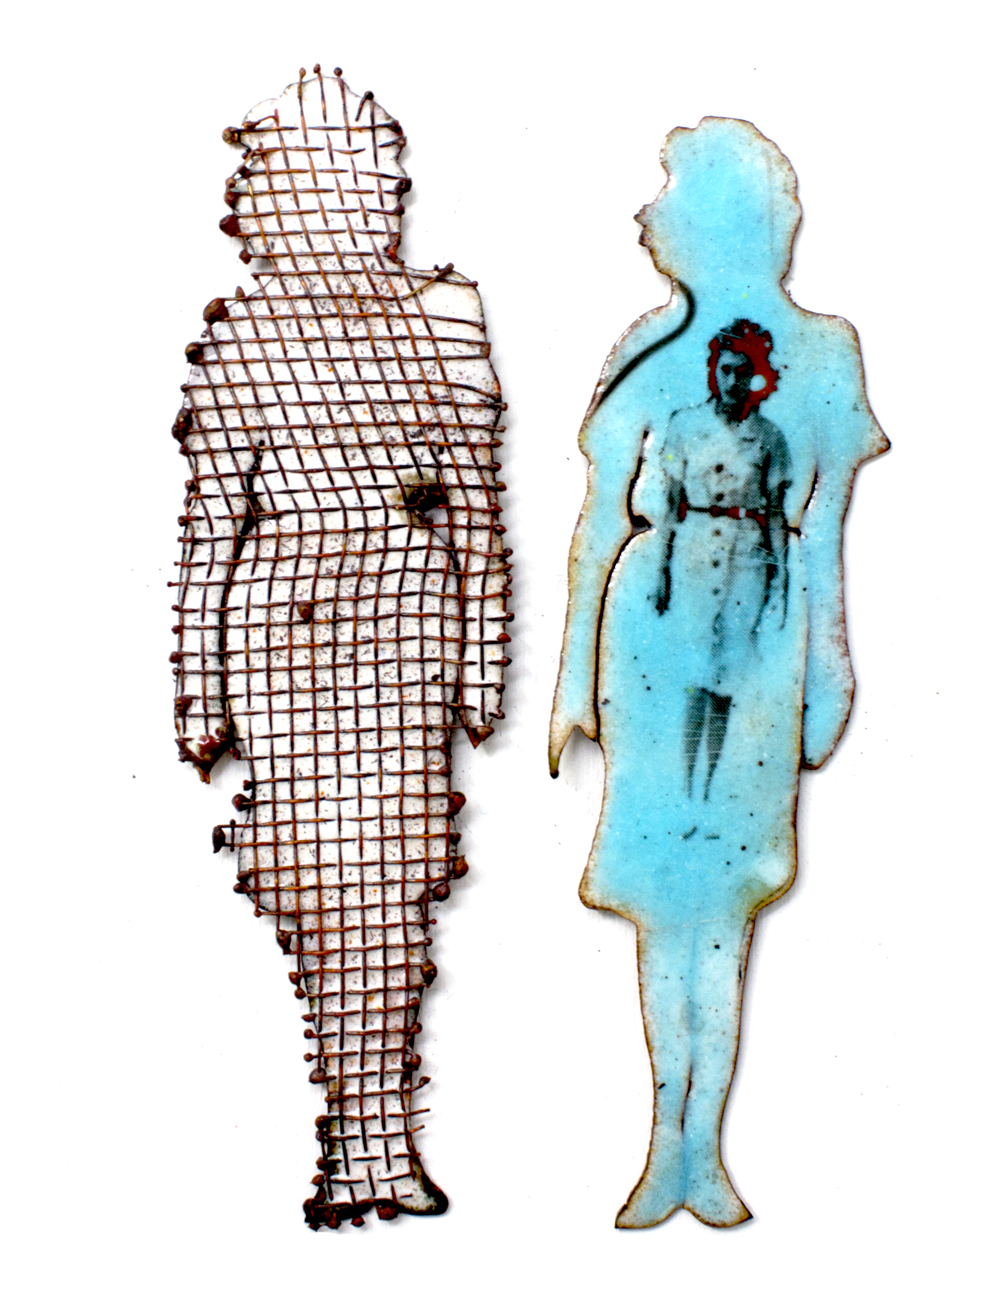 Two cut out figures by Evelyn Markasky